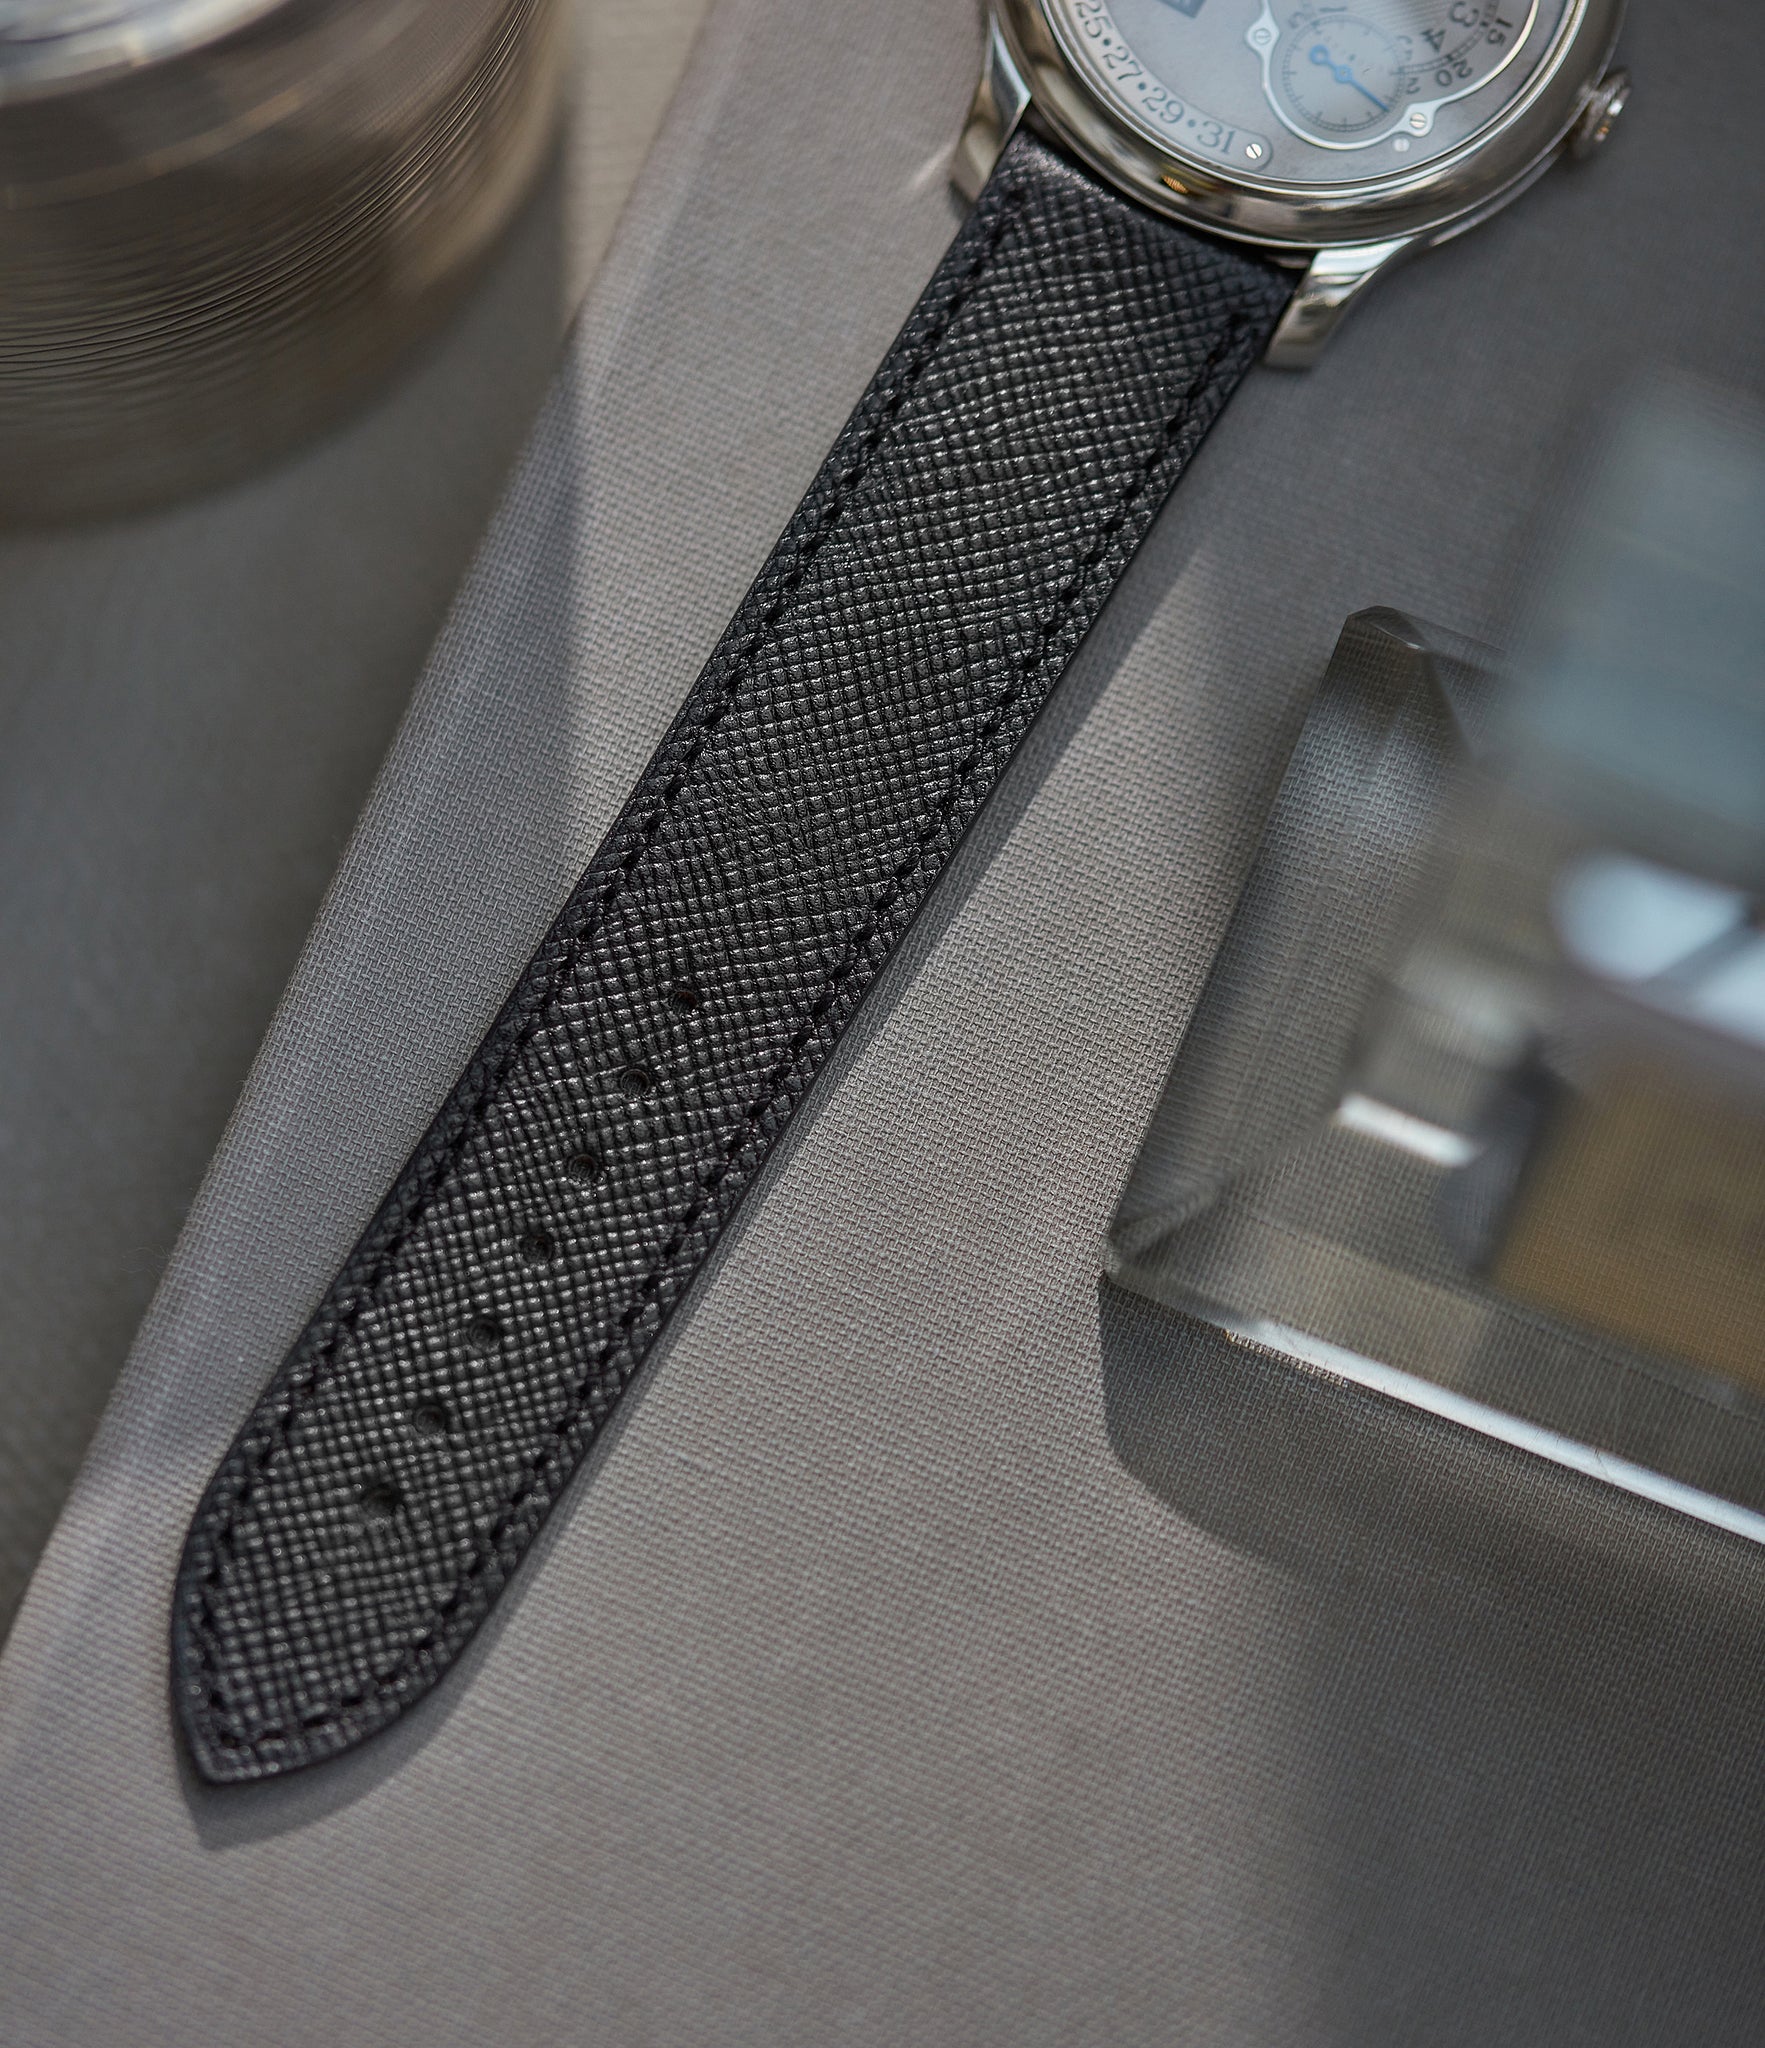 Buy saffiano quality watch strap in polished obsidian black from A Collected Man London, in short or regular lengths. We are proud to offer these hand-crafted watch straps, thoughtfully made in Europe, to suit your watch. Available to order online for worldwide delivery.